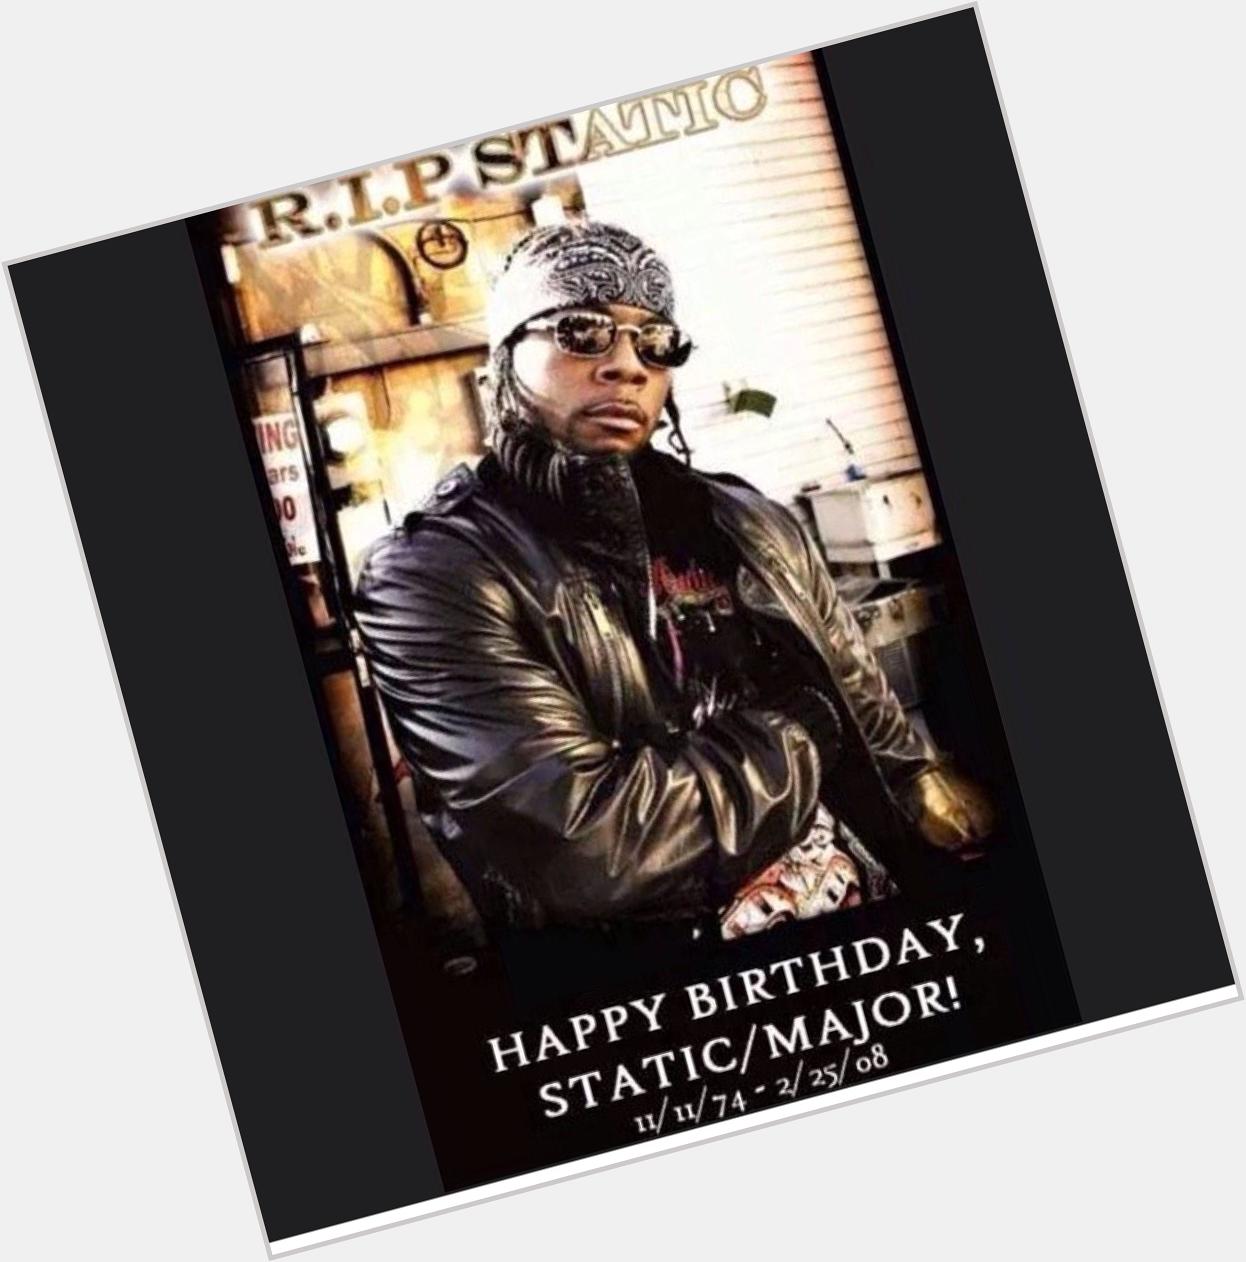 Happy Bday & RIP to 1 of my music heroes Static Major. Hell of a singer/songwriter who wrote for all your fav artists 